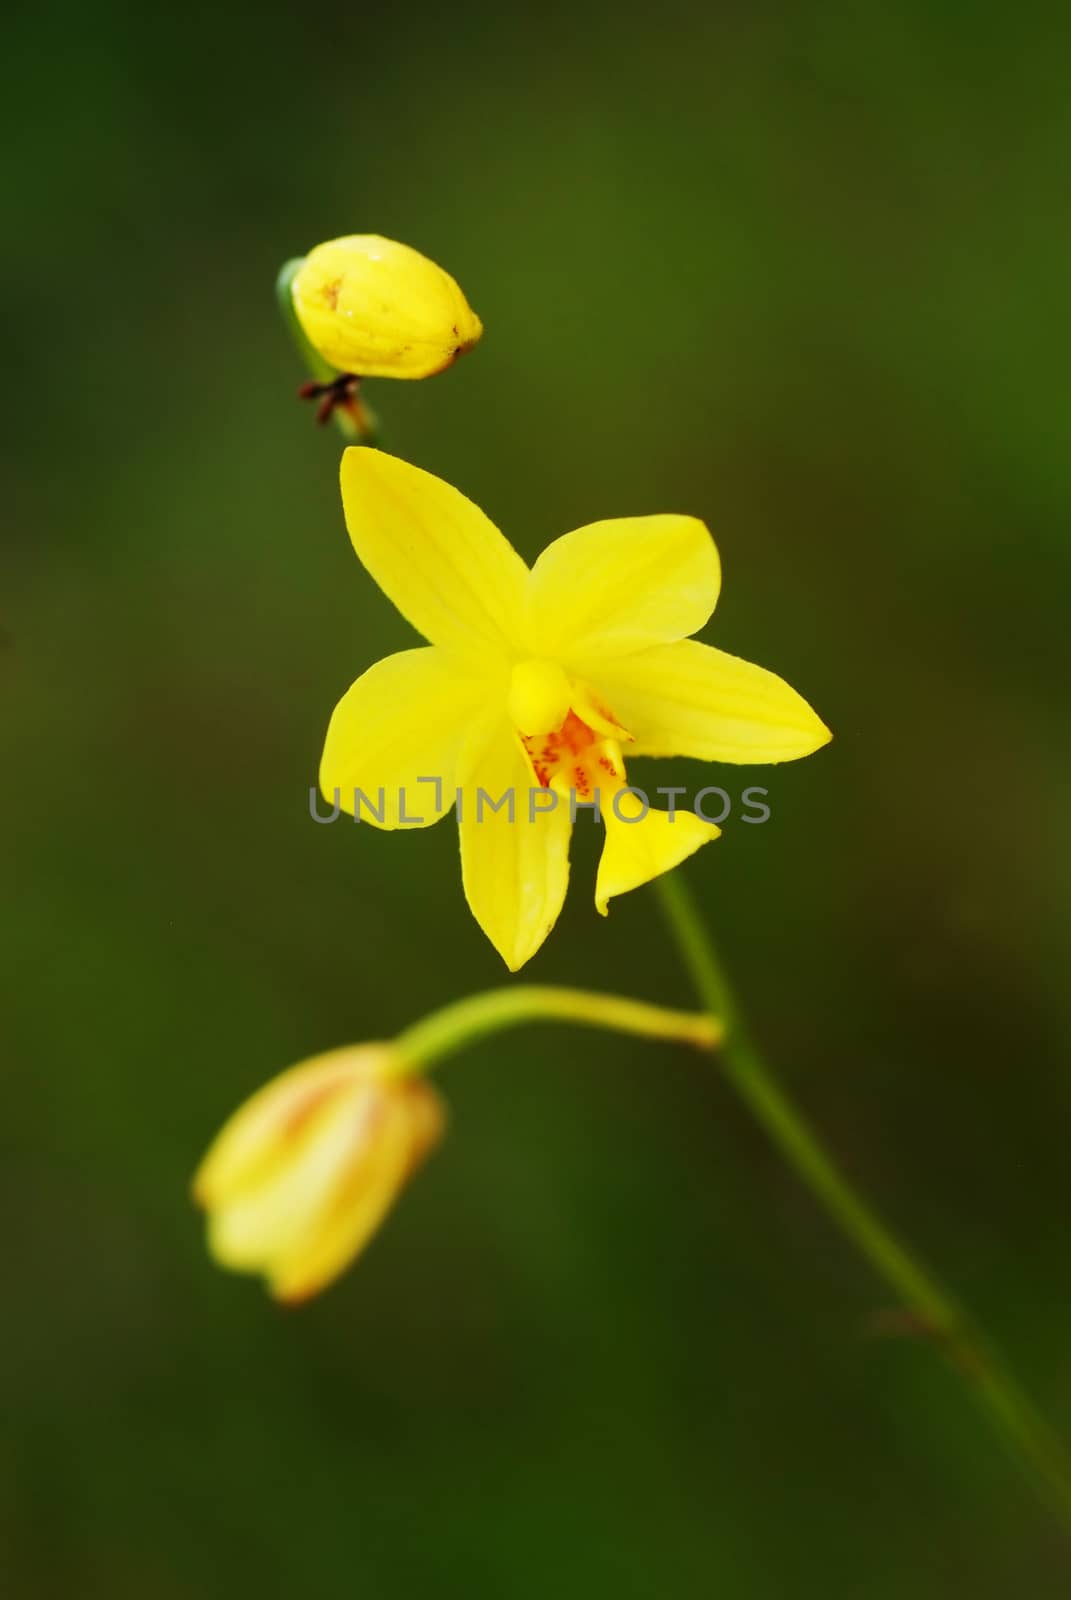 Soft focus Blooming yellow Similar Spathoglottis ground orchid flowers by ideation90